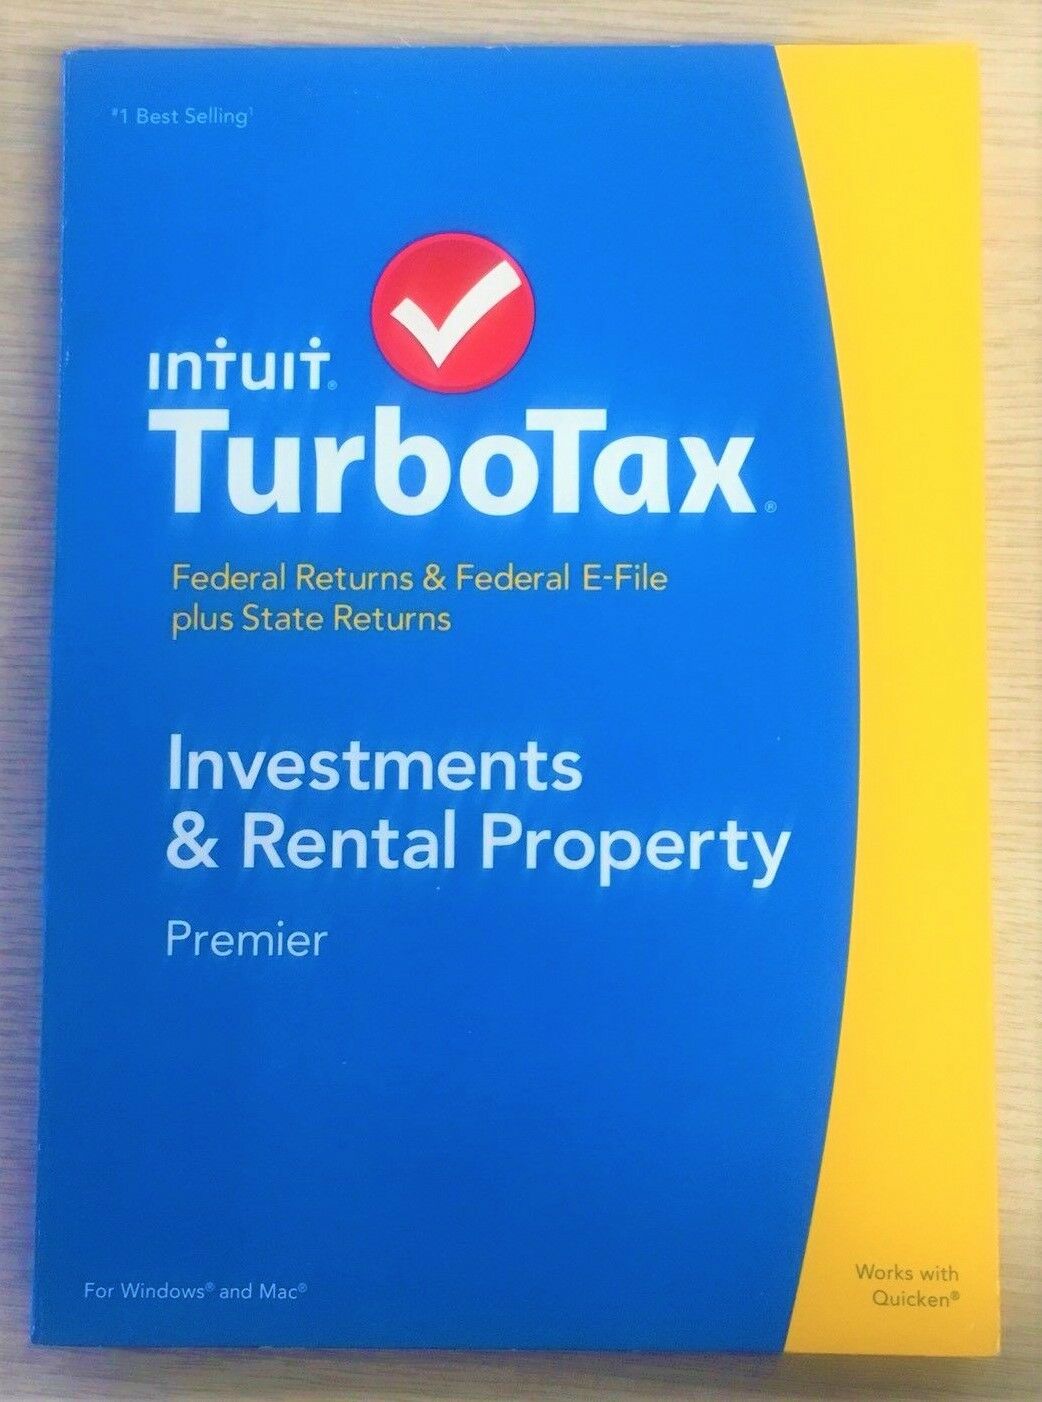 Turbotax 2014 Premier Federal & State Investment & Rentals- Upgrade From Deluxe